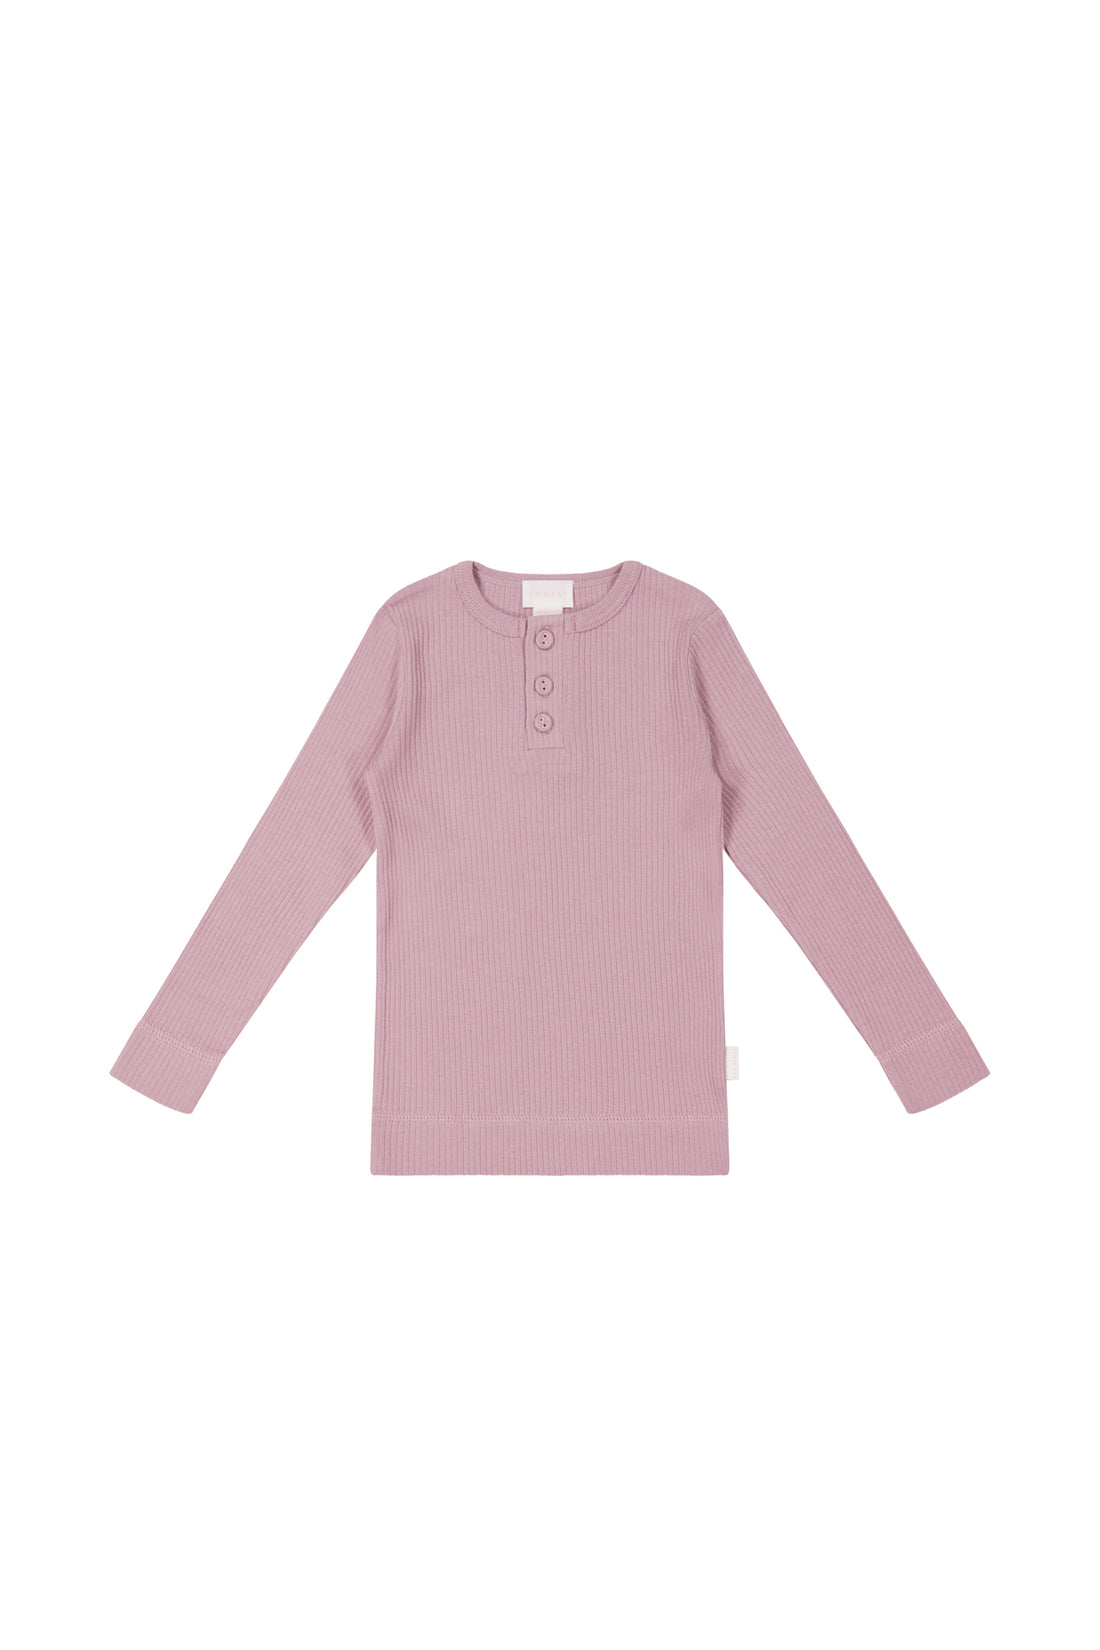 Organic Cotton Modal Long Sleeve Henley - Vintage Violet Childrens Top from Jamie Kay USA